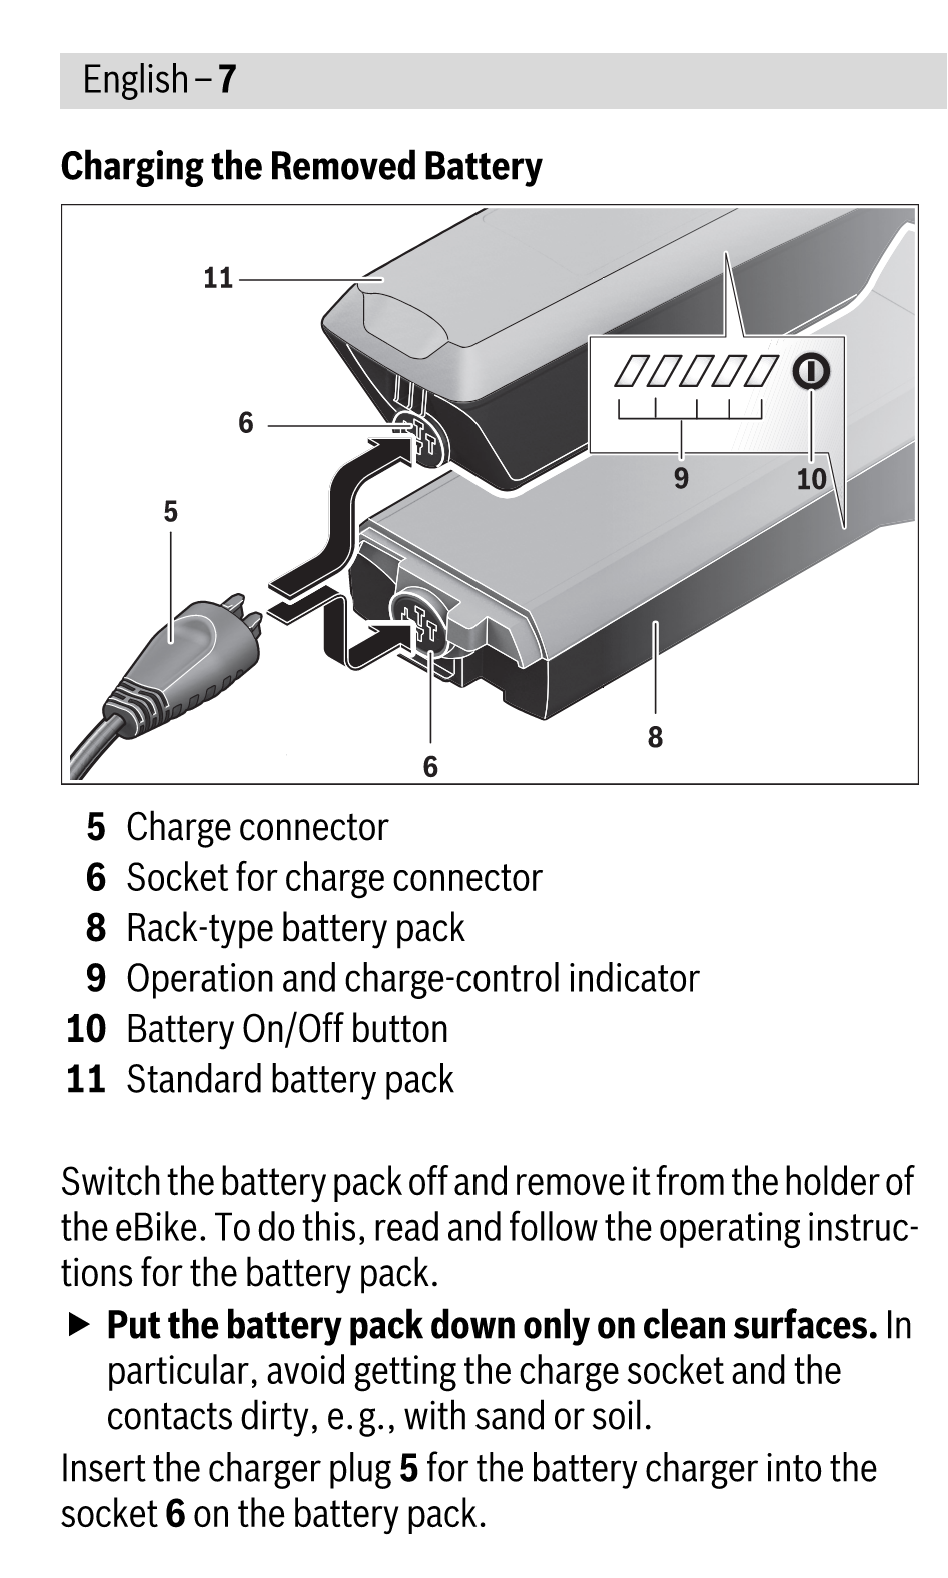 Bosch charger - charging the removed battery.png